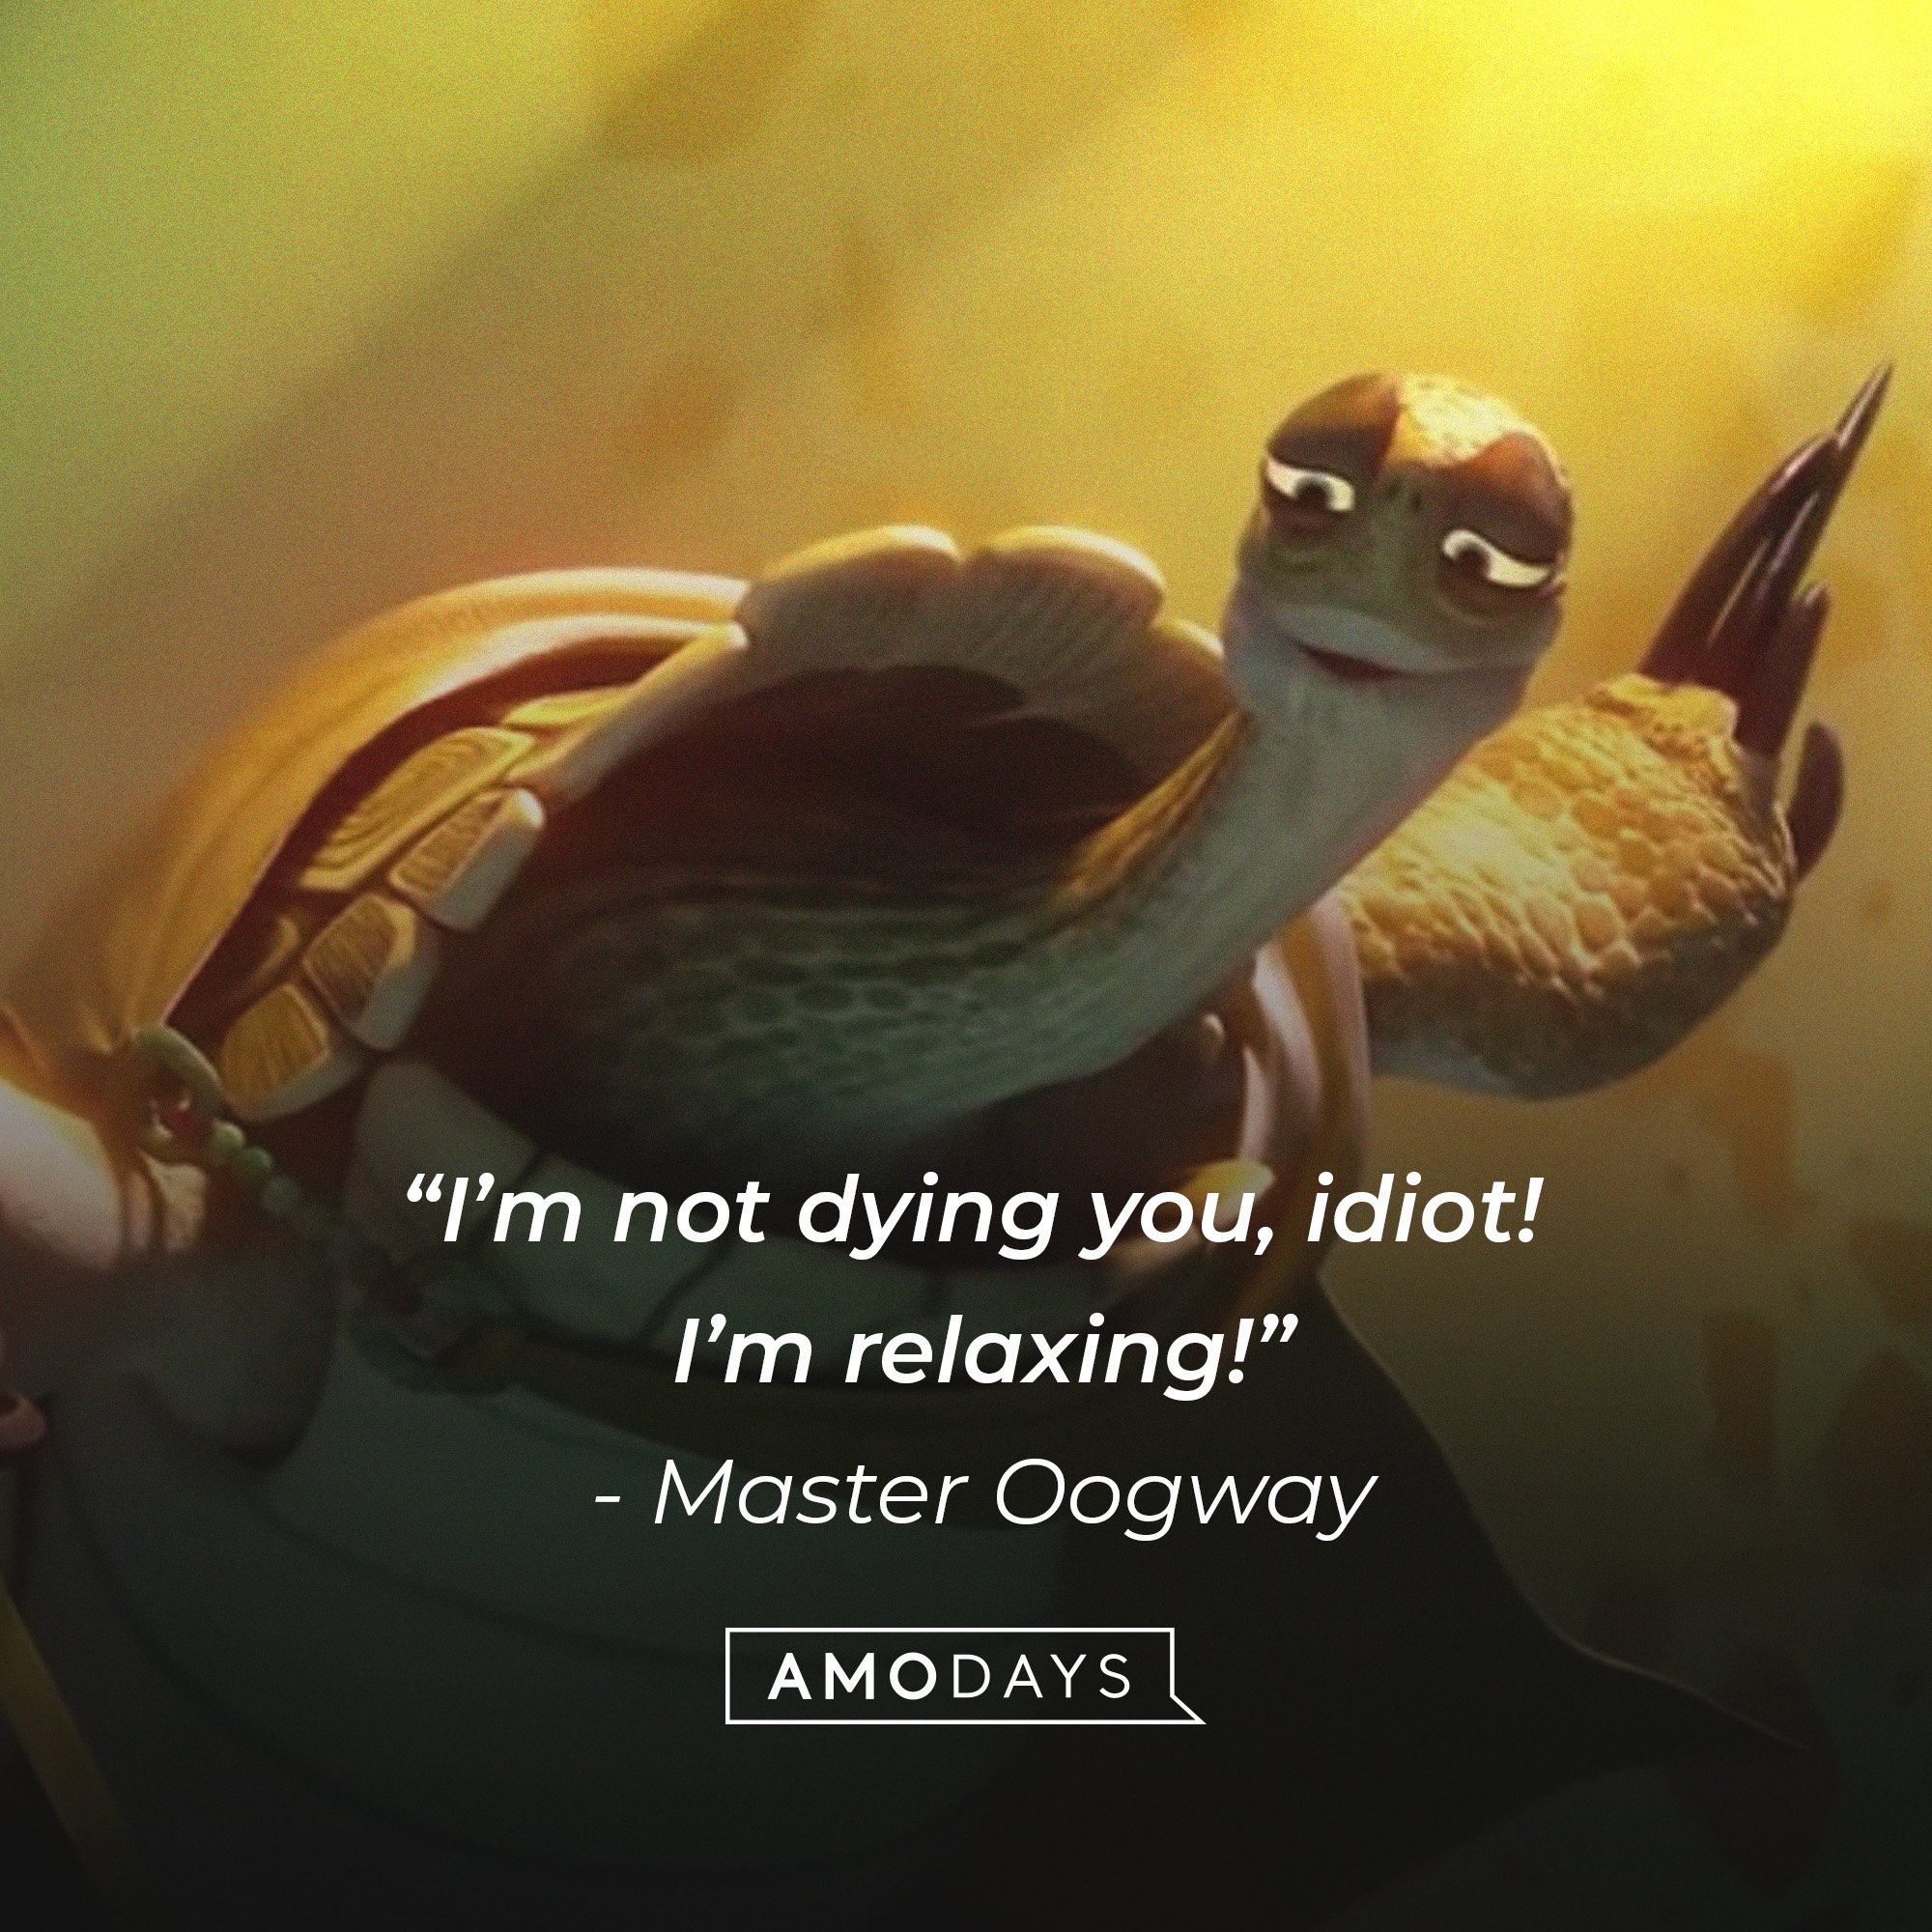 Master Oogway’s quote: “I’m not dying you, idiot! I’m relaxing!”  | Image: AmoDays